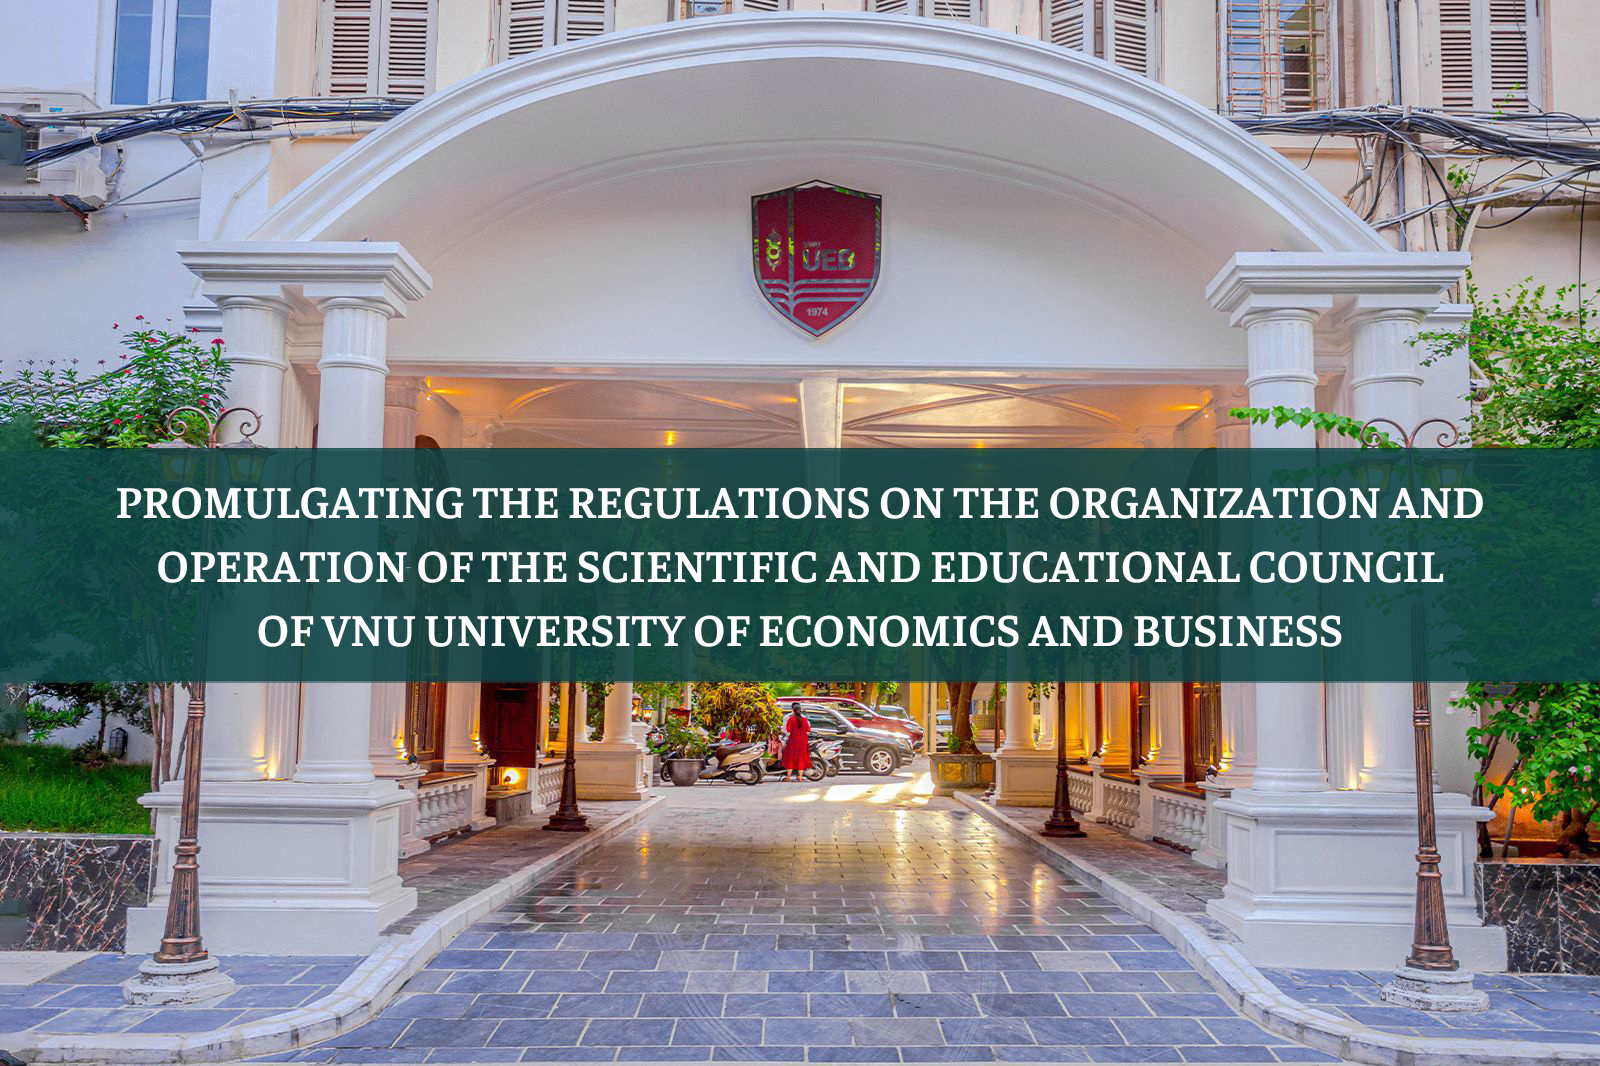 Promulgating the Regulations on the Organization and Operation of the Scientific and Educational Council of VNU University of Economics and Business